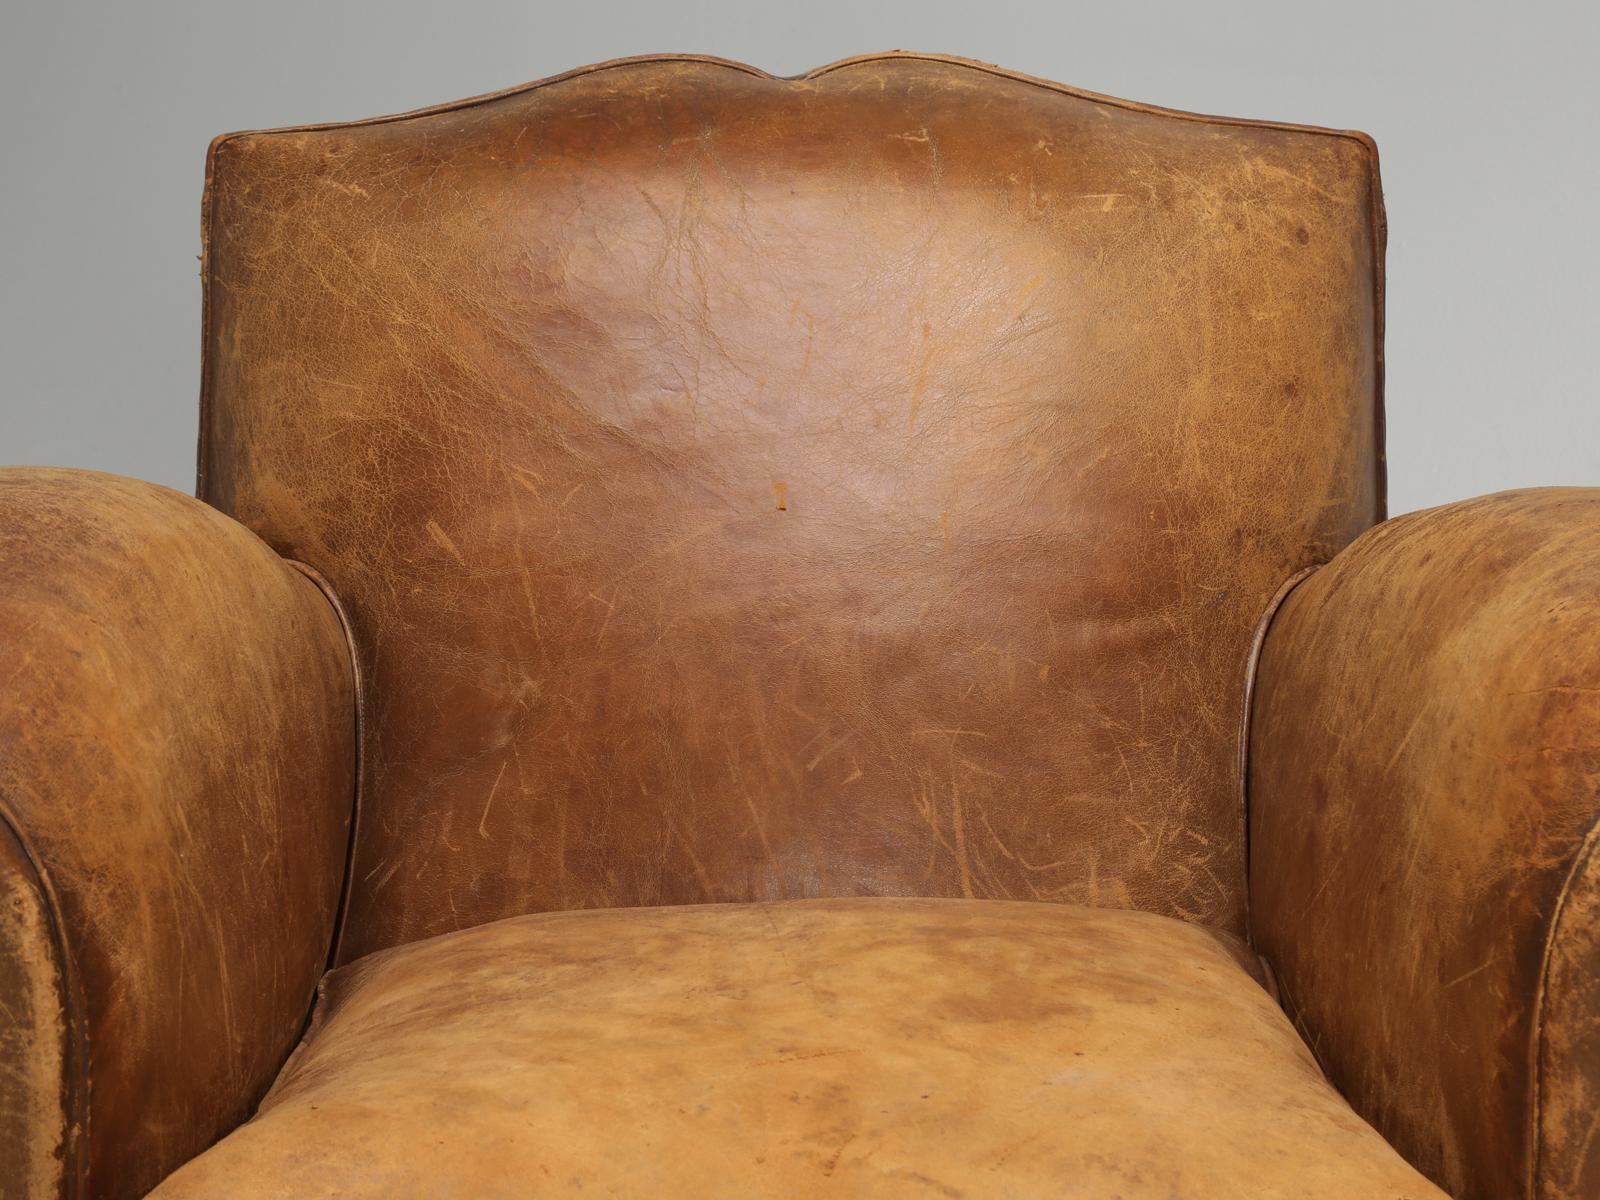 A completely original pair of French leather Art Deco club chairs, that have the appearance that they have not been touched in over 85-years. However, the truth is, that each French club chair was painstakingly disassembled and rebuilt from the